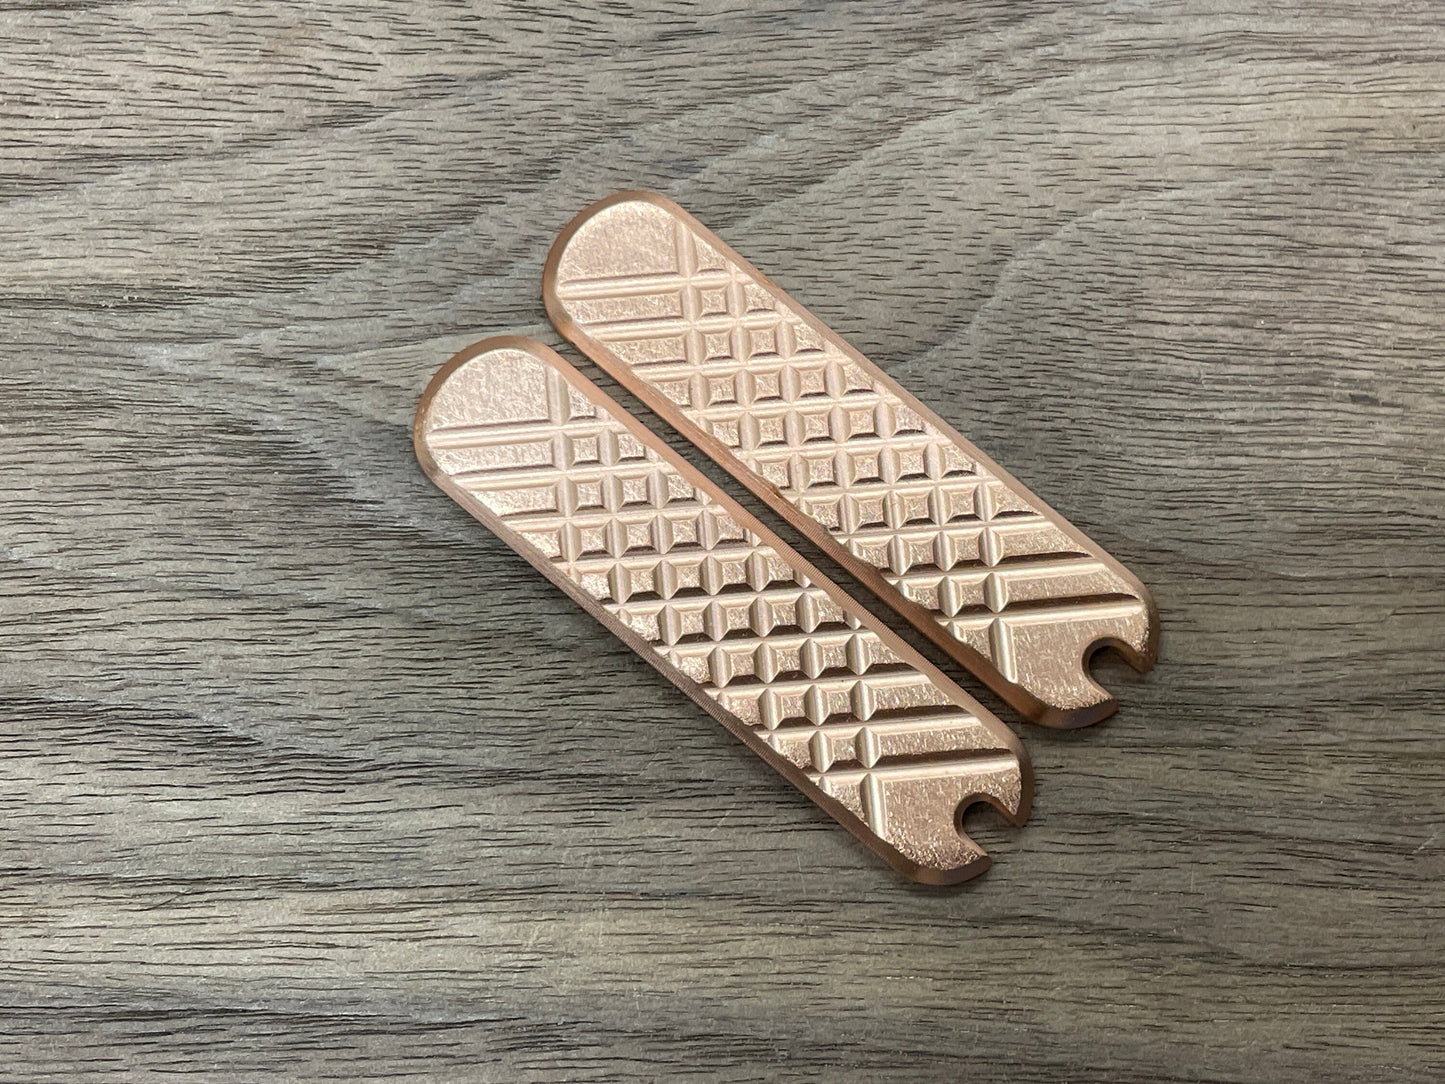 58mm FRAG Deep brushed Copper Scales for Swiss Army SAK